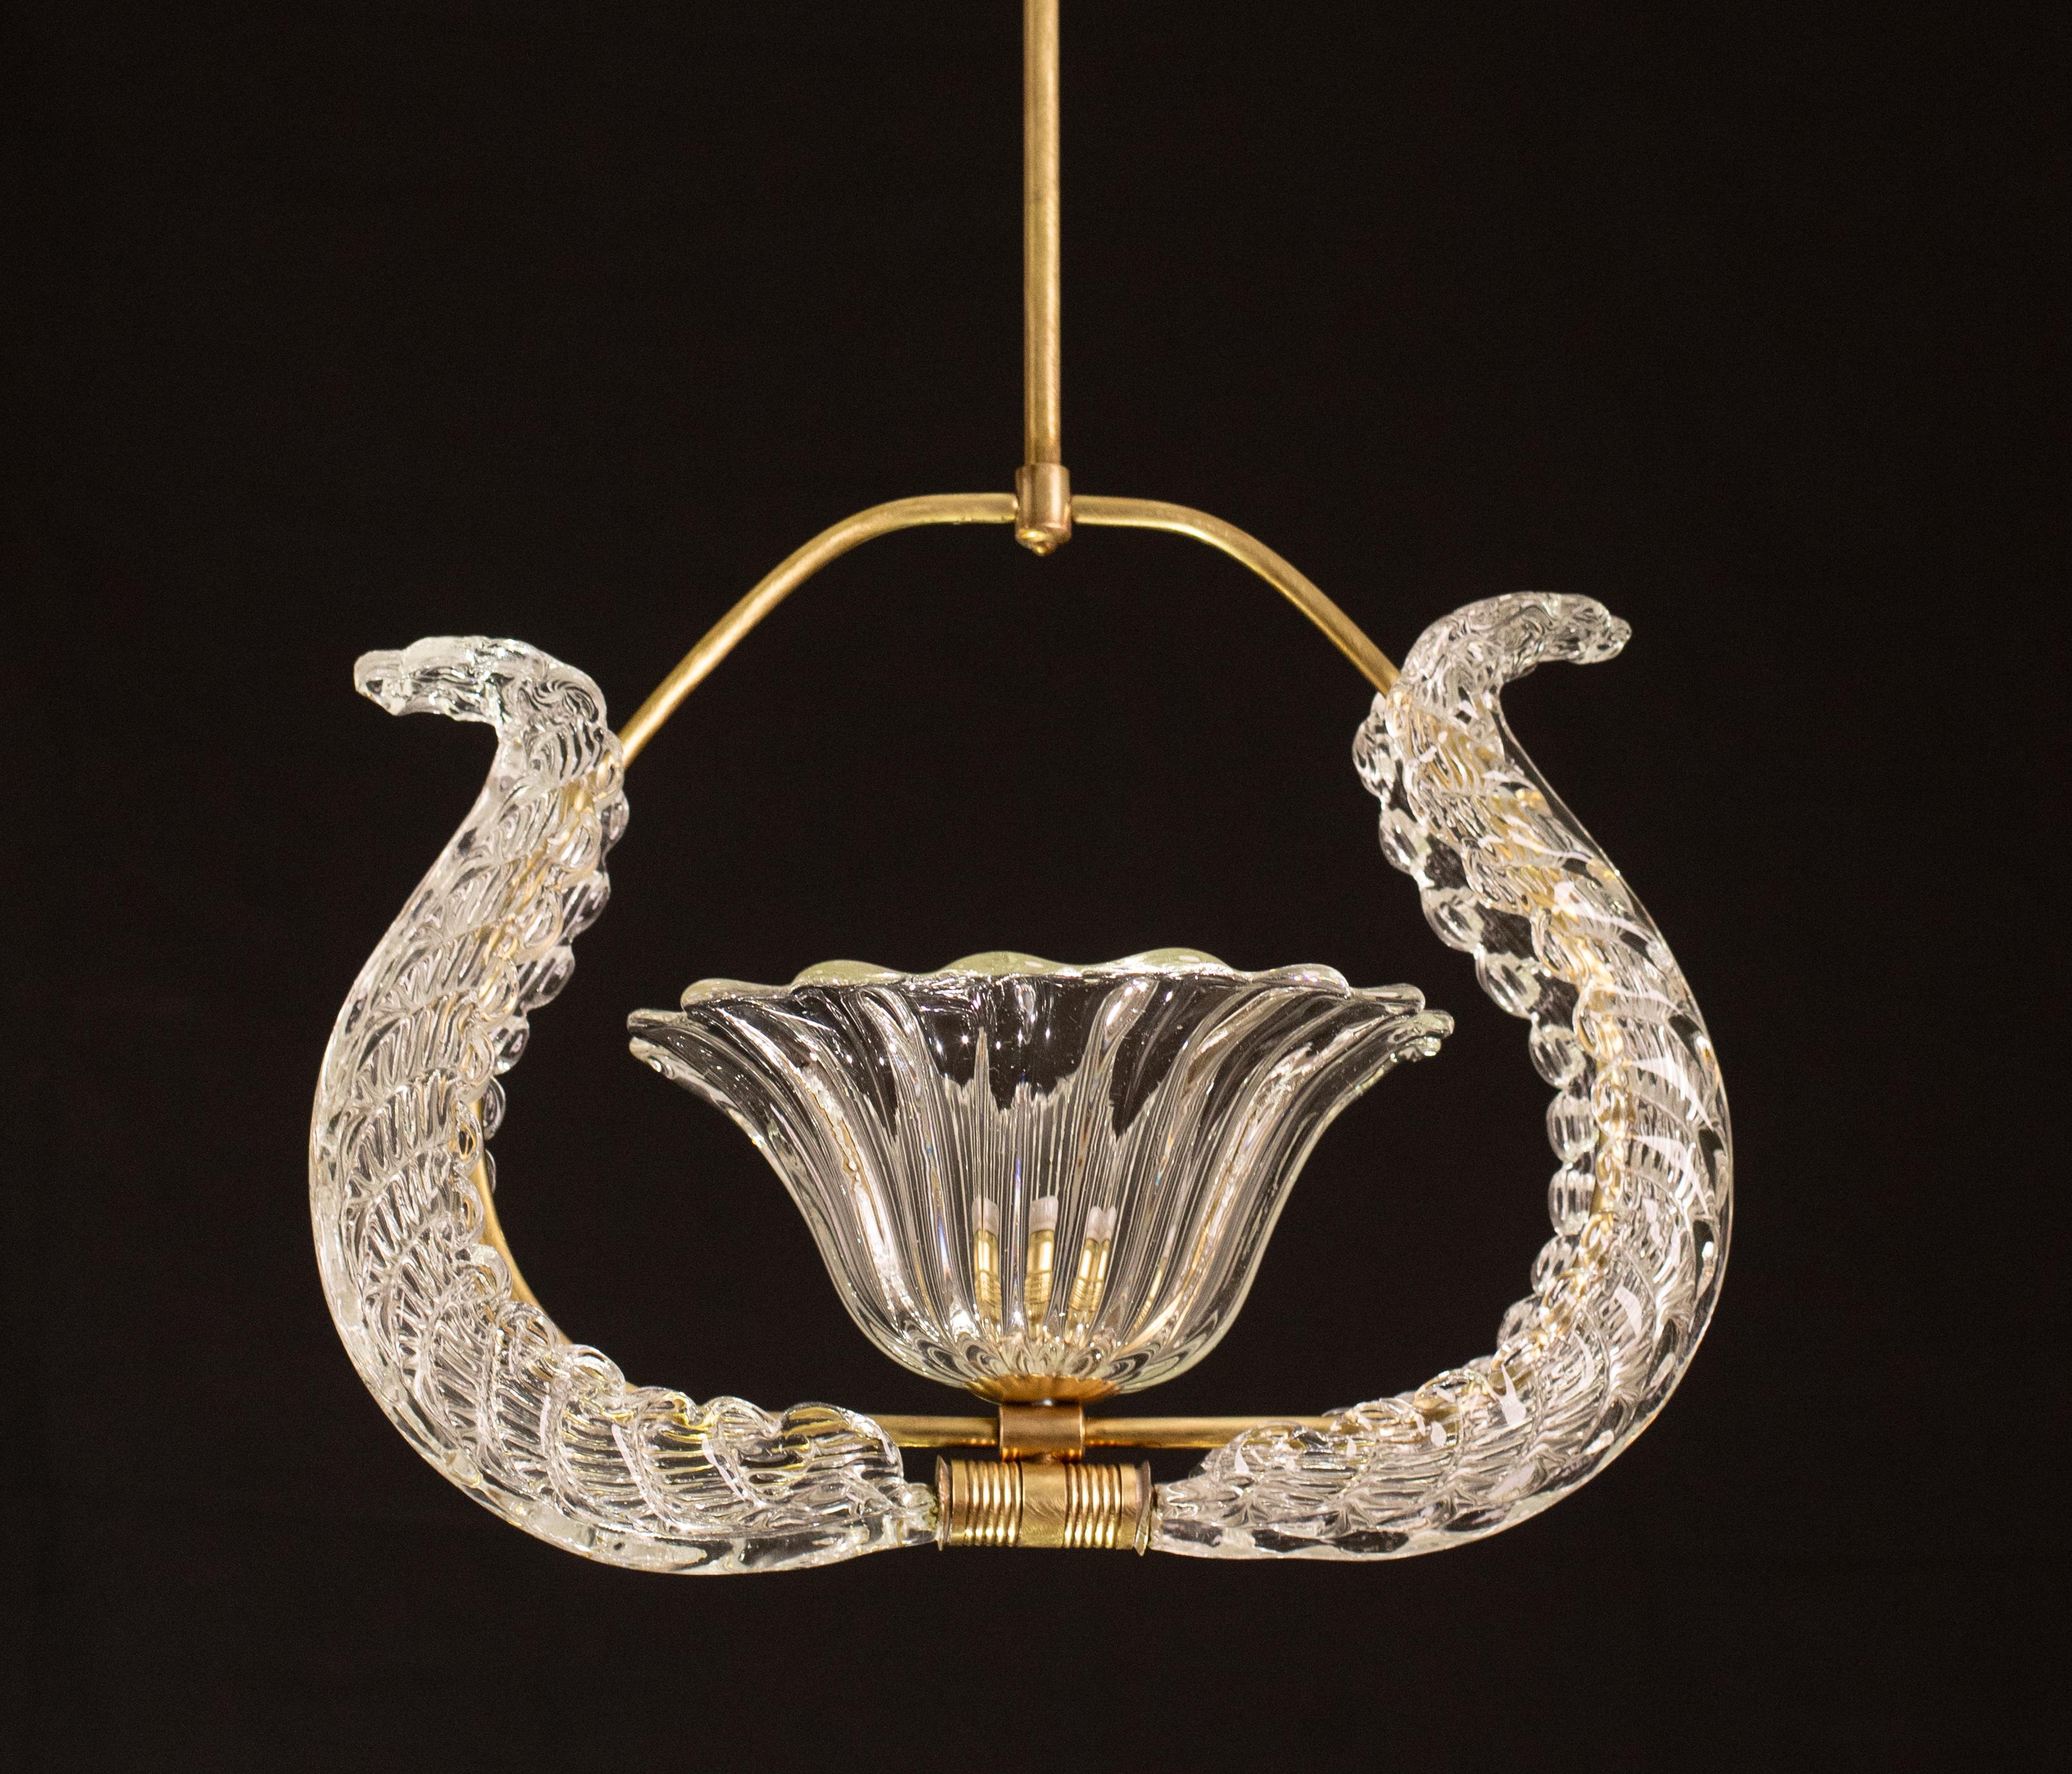 European Charming Art Decò Barovier and Toso Chandelier, 1940s For Sale